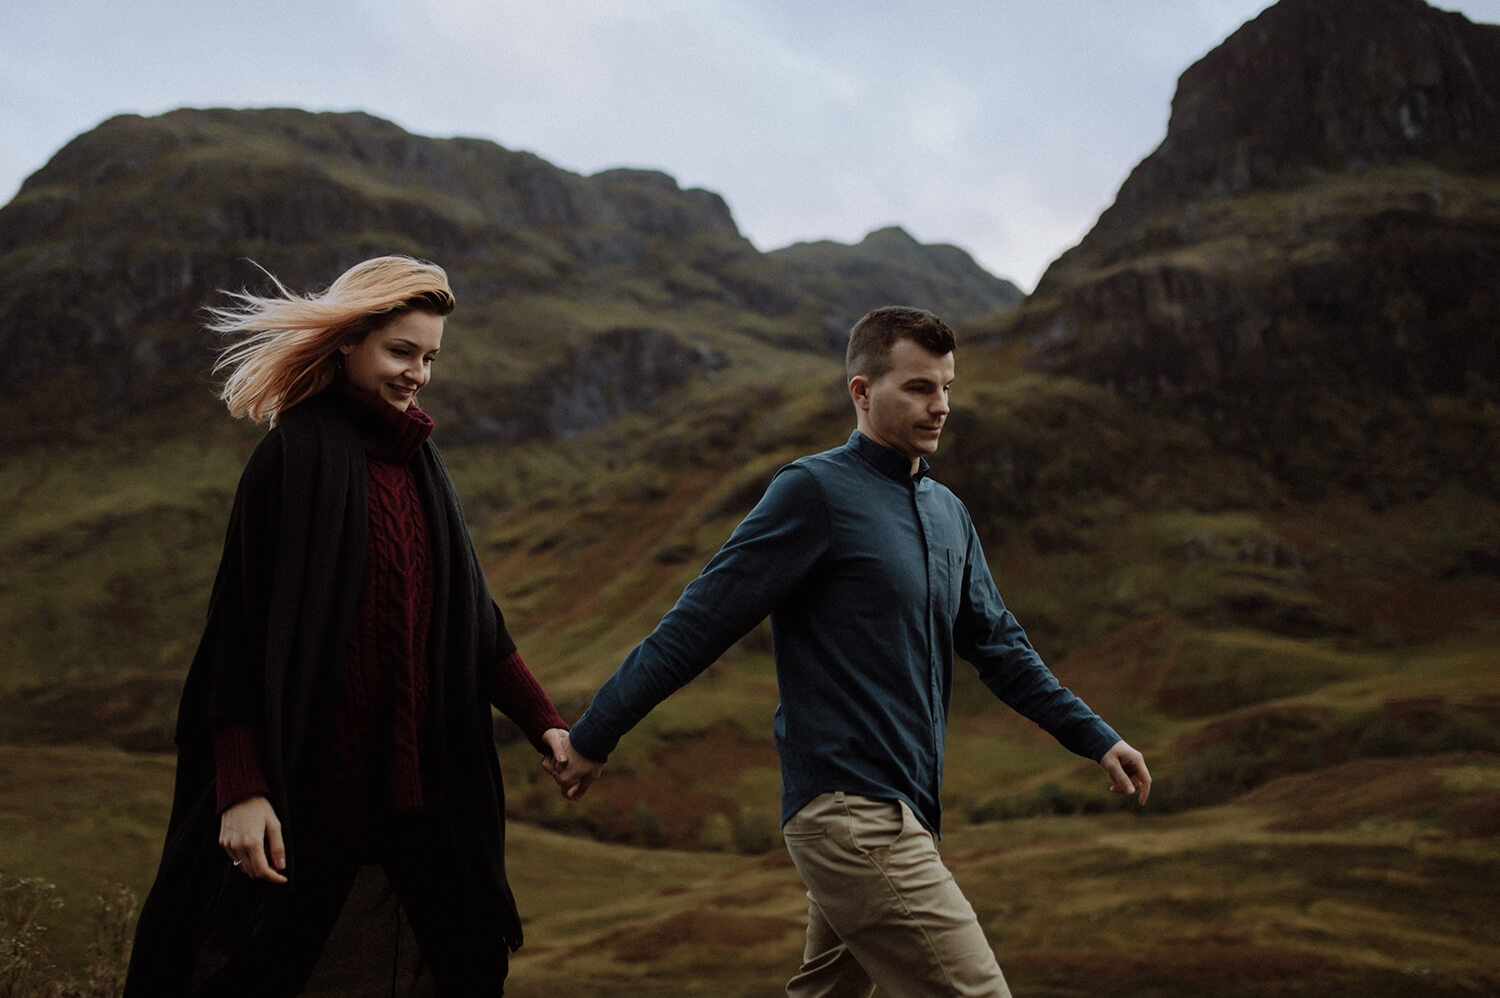 Couple photo session from Scotland.